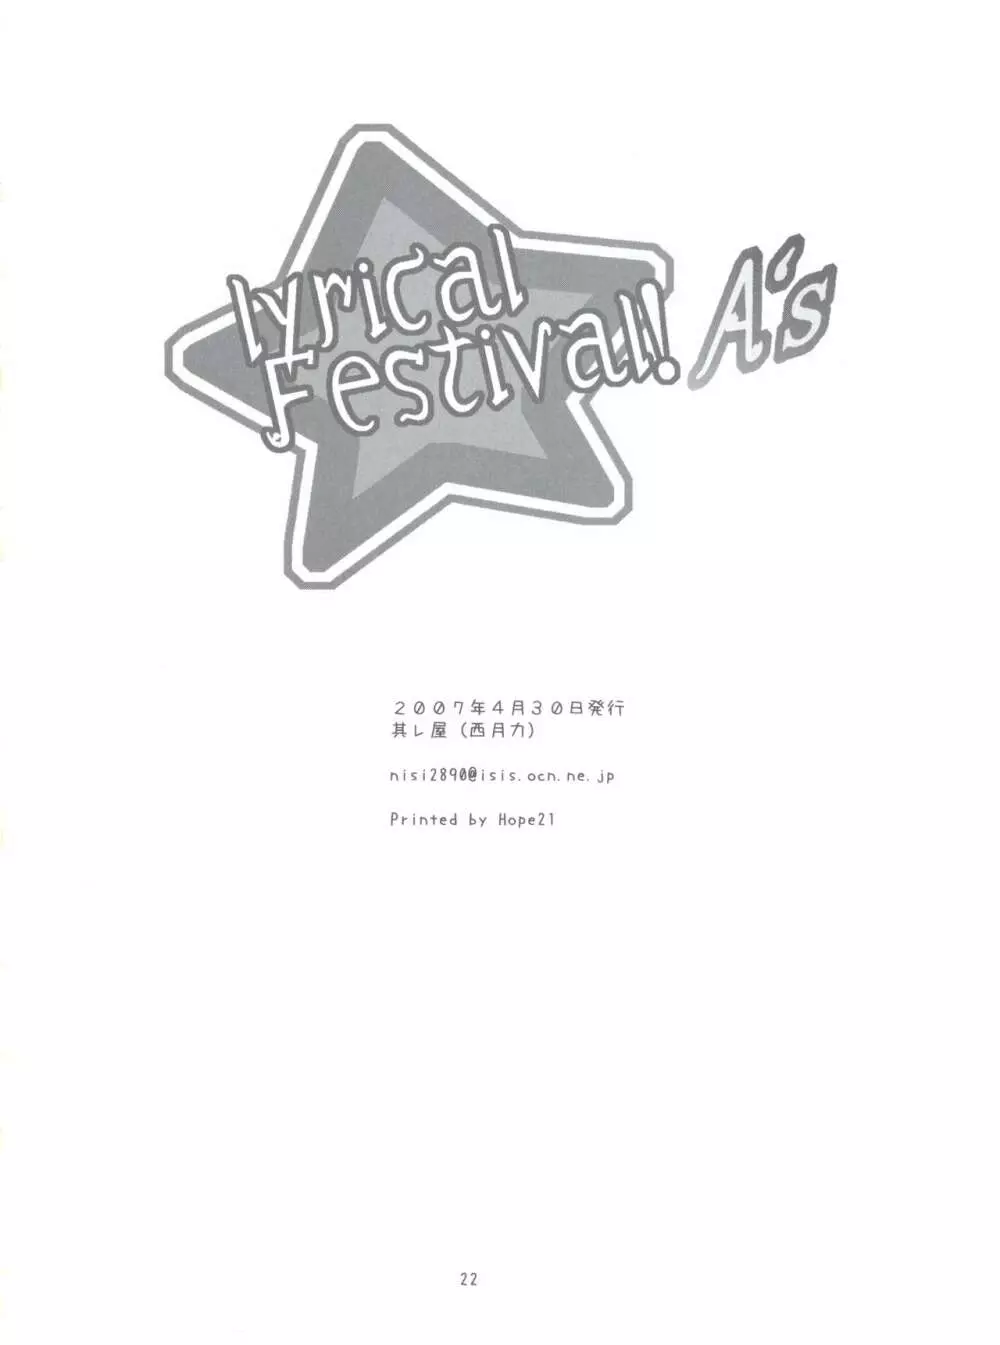 lyrical Festival! A's Page.21